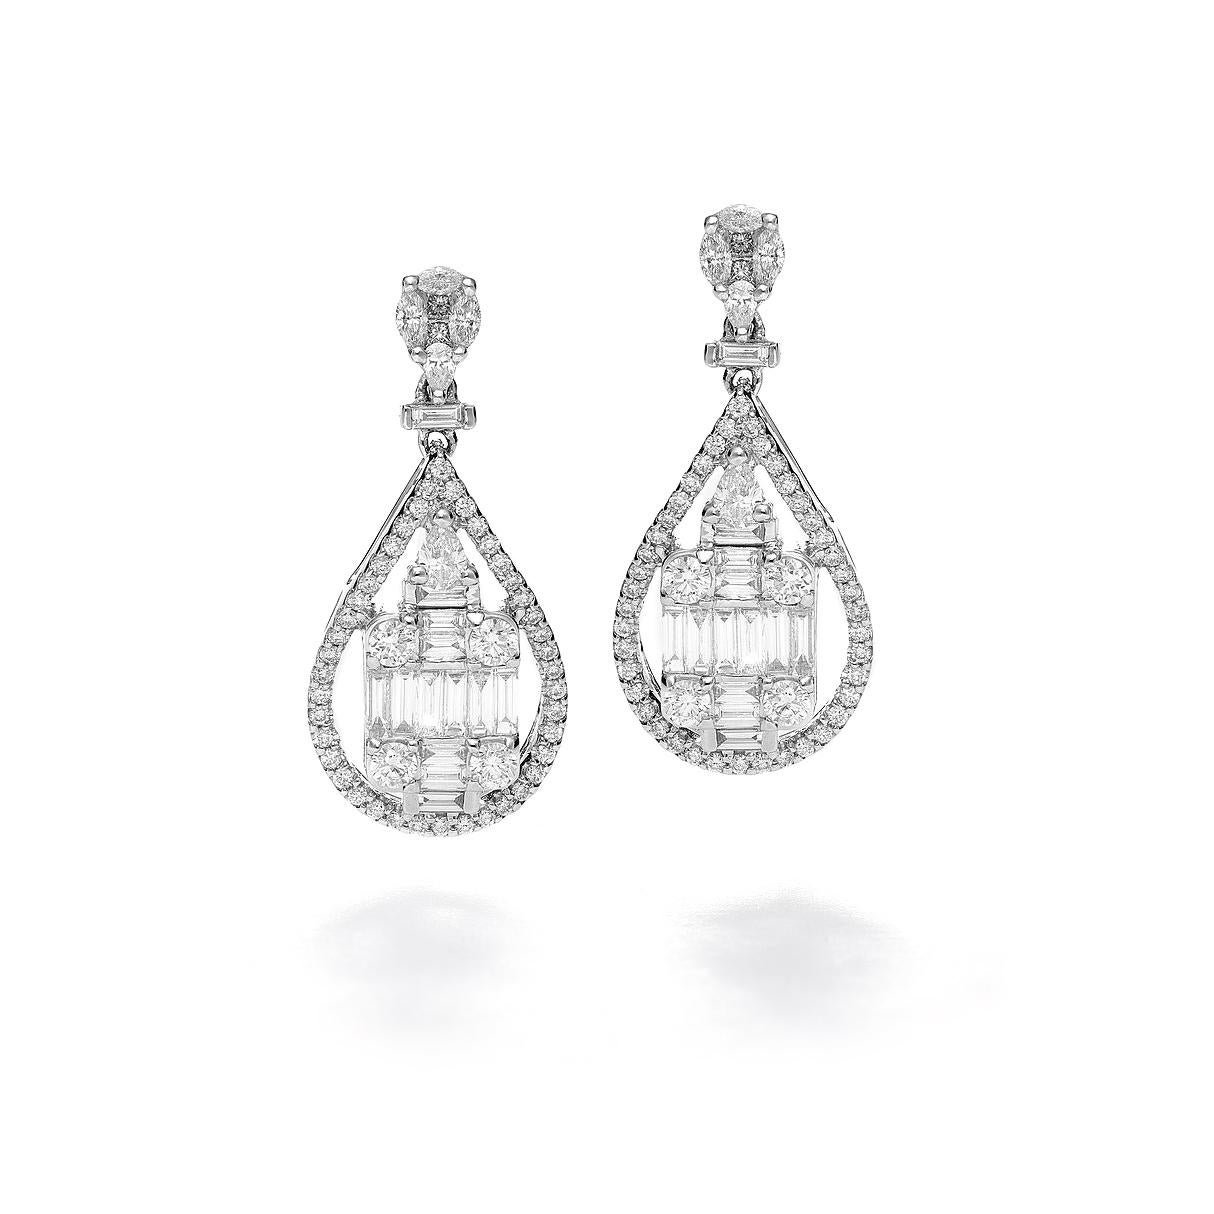 Earrings in 18kt white gold set with 40 princess, marquise baguette and pear-shaped cut diamonds 1.48 cts and 92 diamonds 0.87 cts          